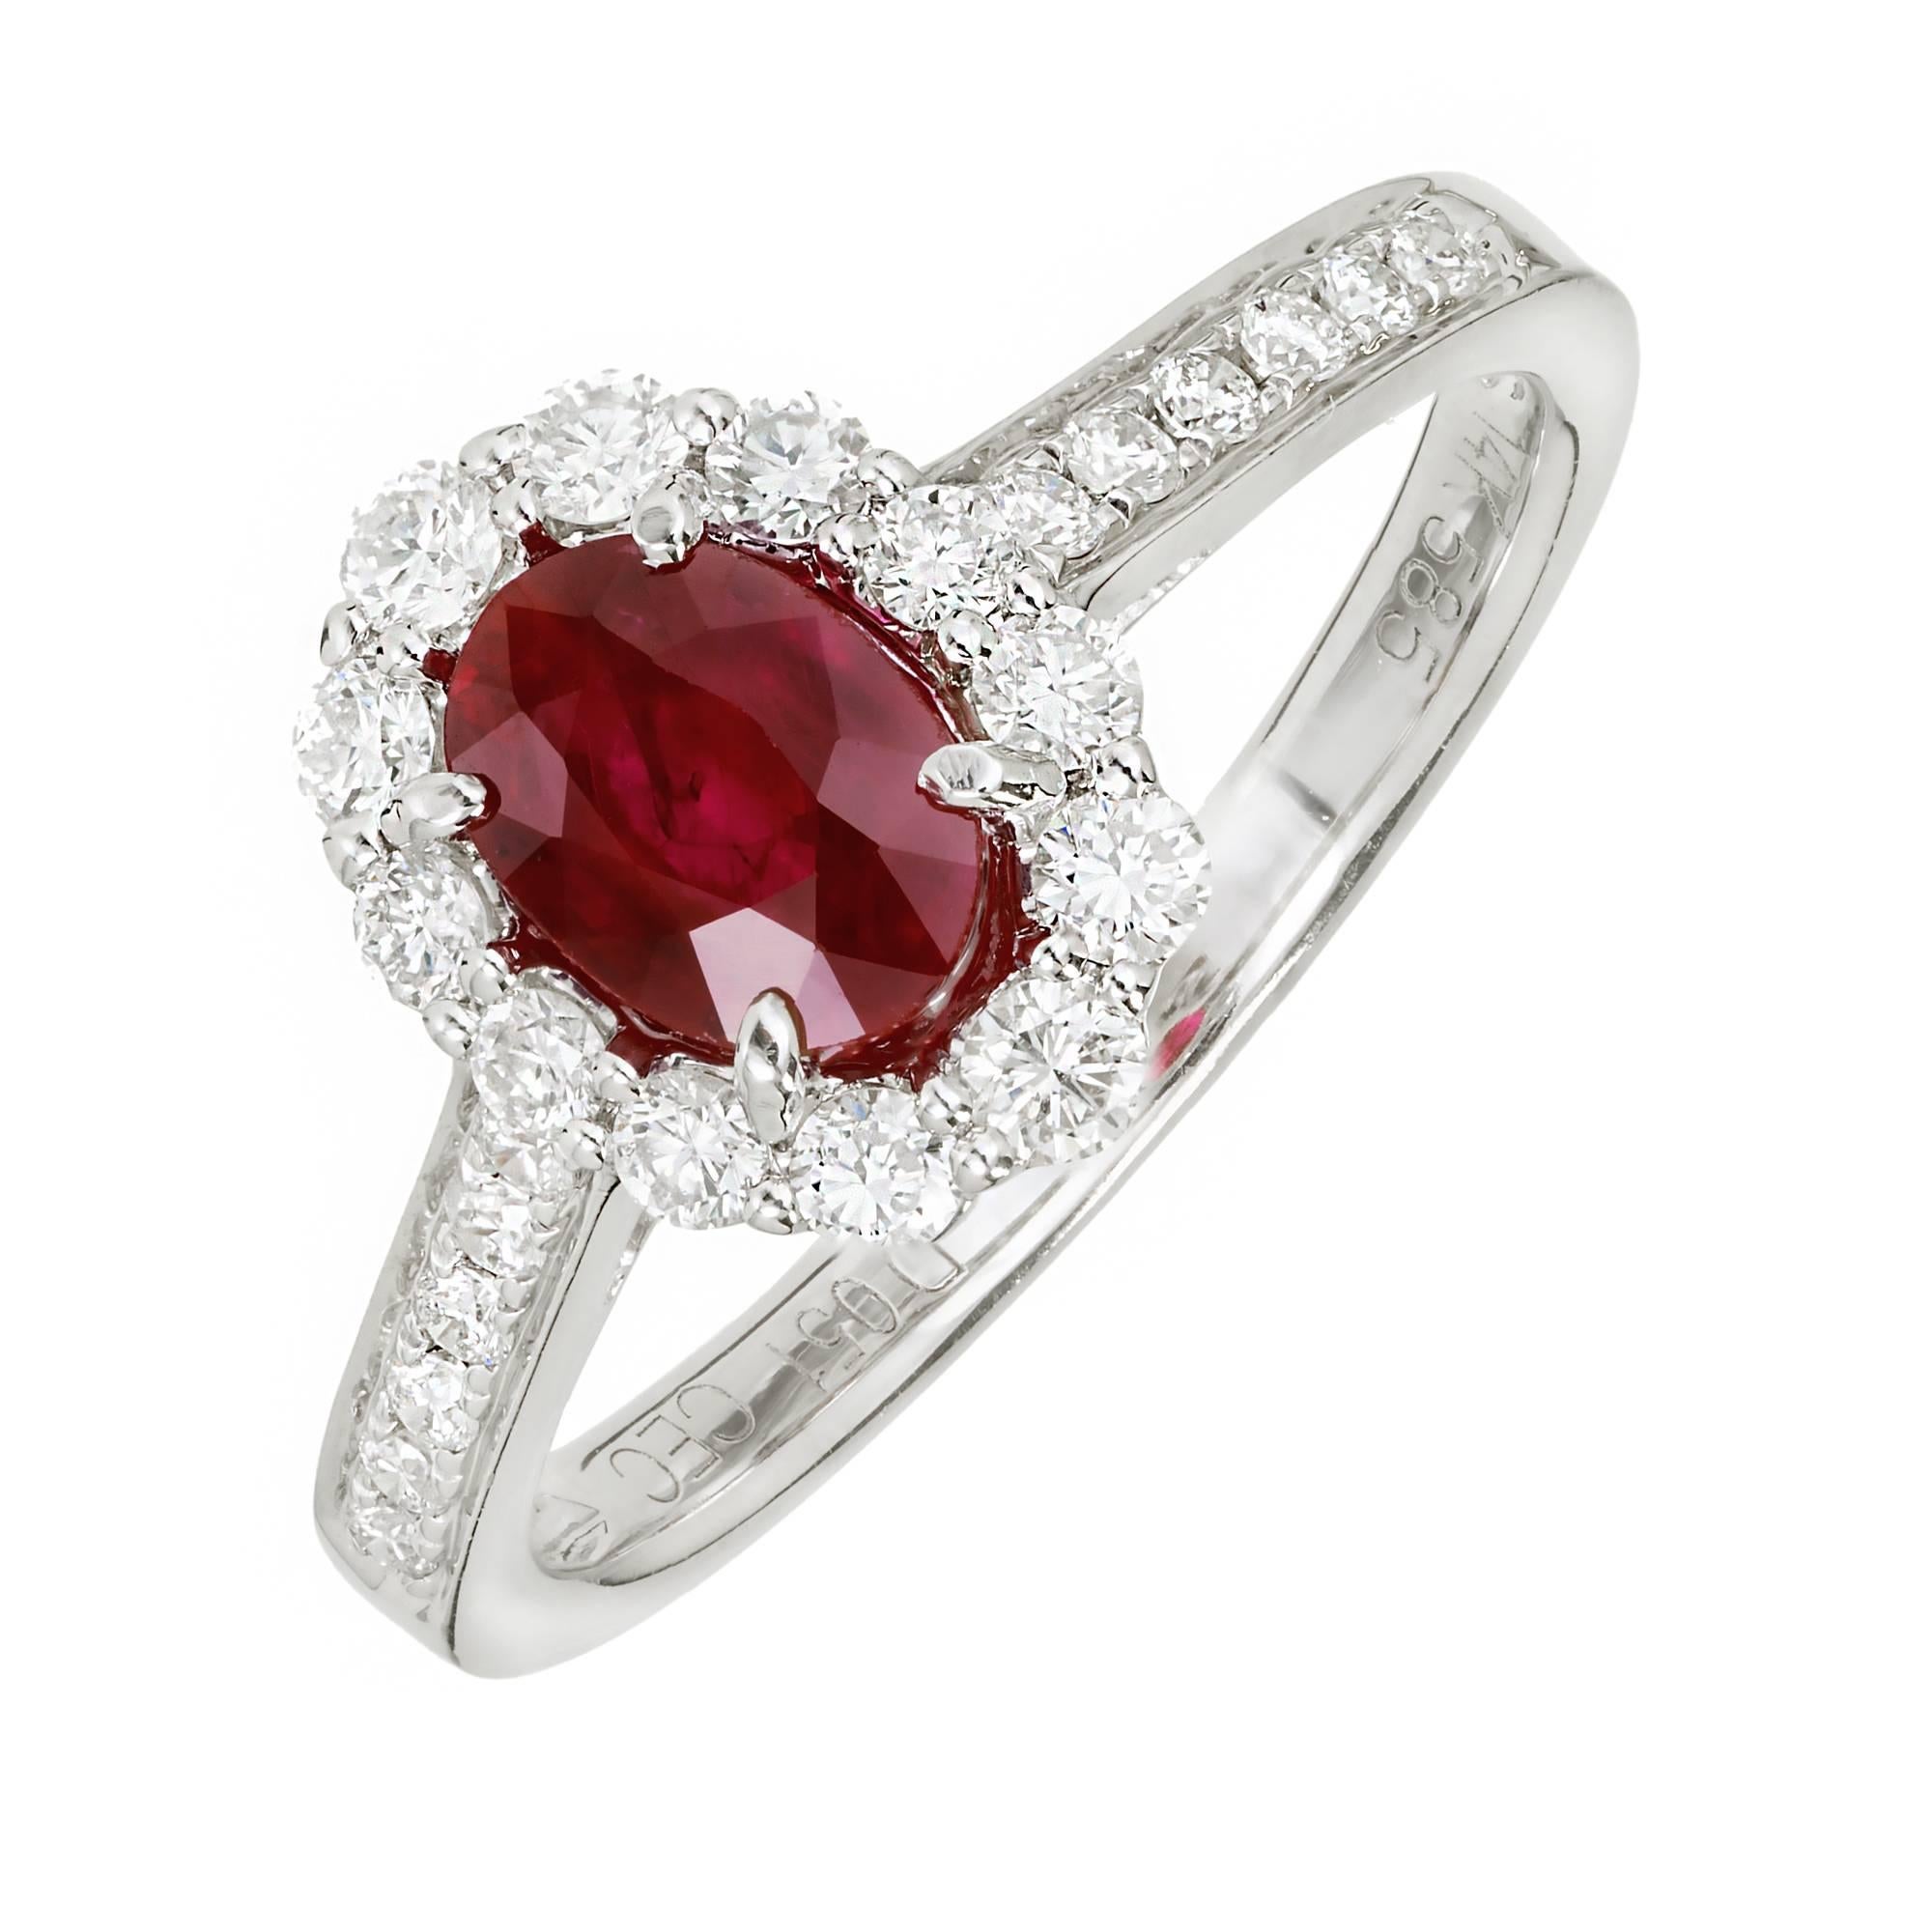 Oval Ruby Diamond halo 14k white gold engagement ring.

1 oval red Ruby, approx. total weight .88cts
24 round full cut Diamonds, approx. total weight .51cts, G, VS
Size 7 and sizable
14k white gold
Tested: 14k
Stamped: 14k 585
3.0 grams
Width at